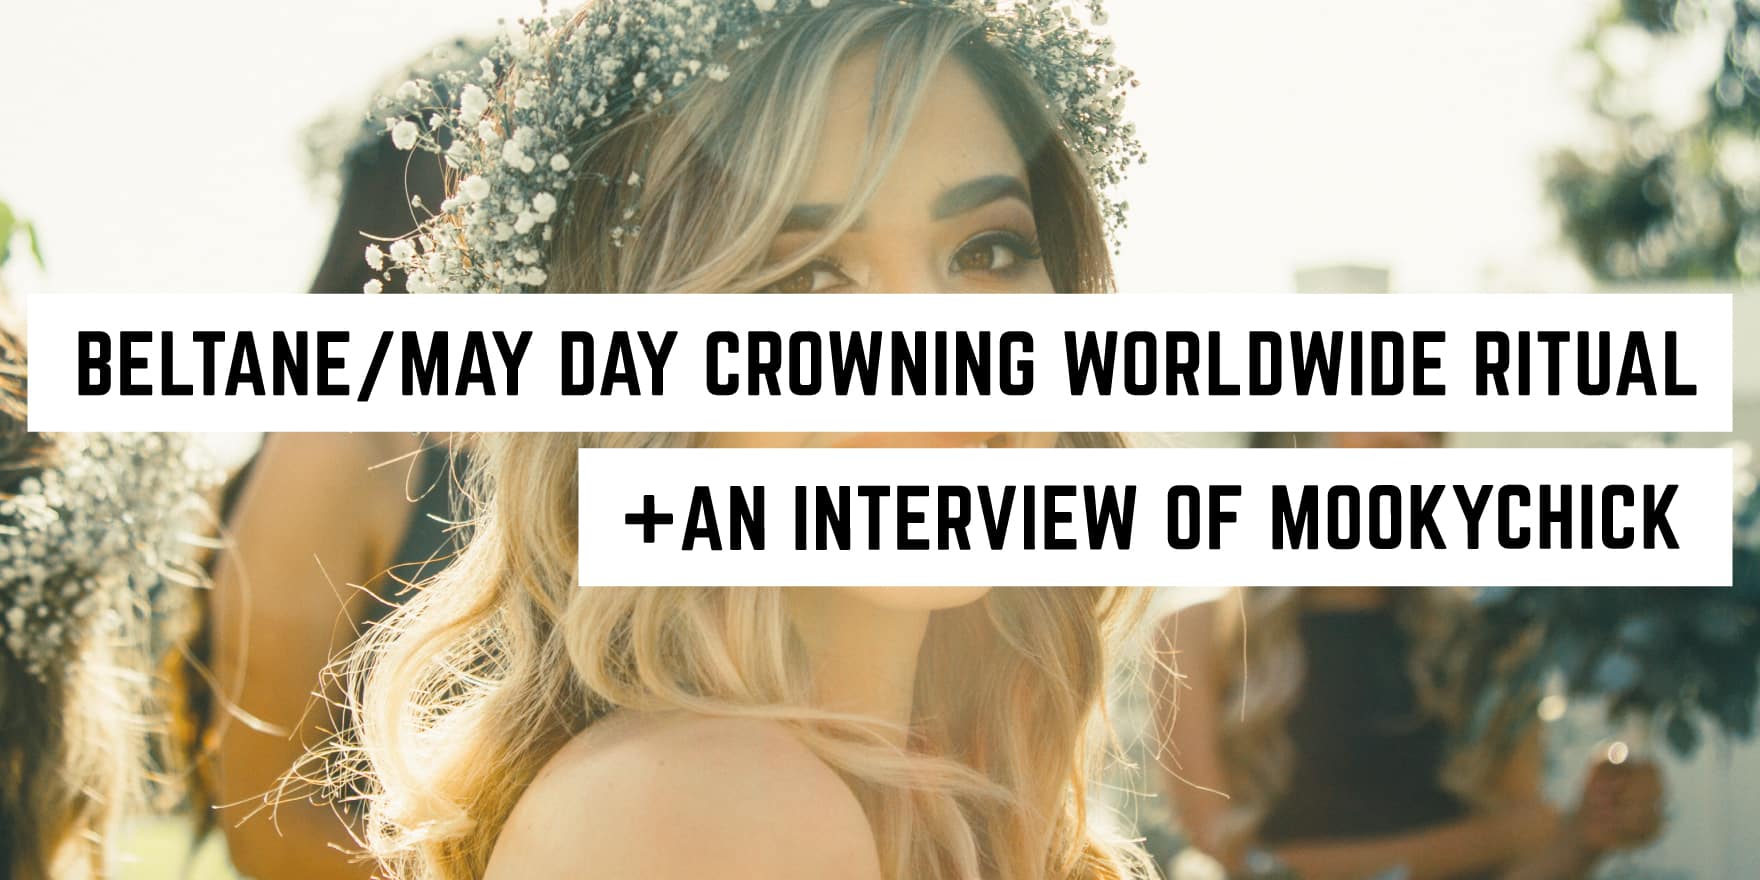 MookyChick’s May Day Crowning Worldwide Ritual ⚡ An Interview